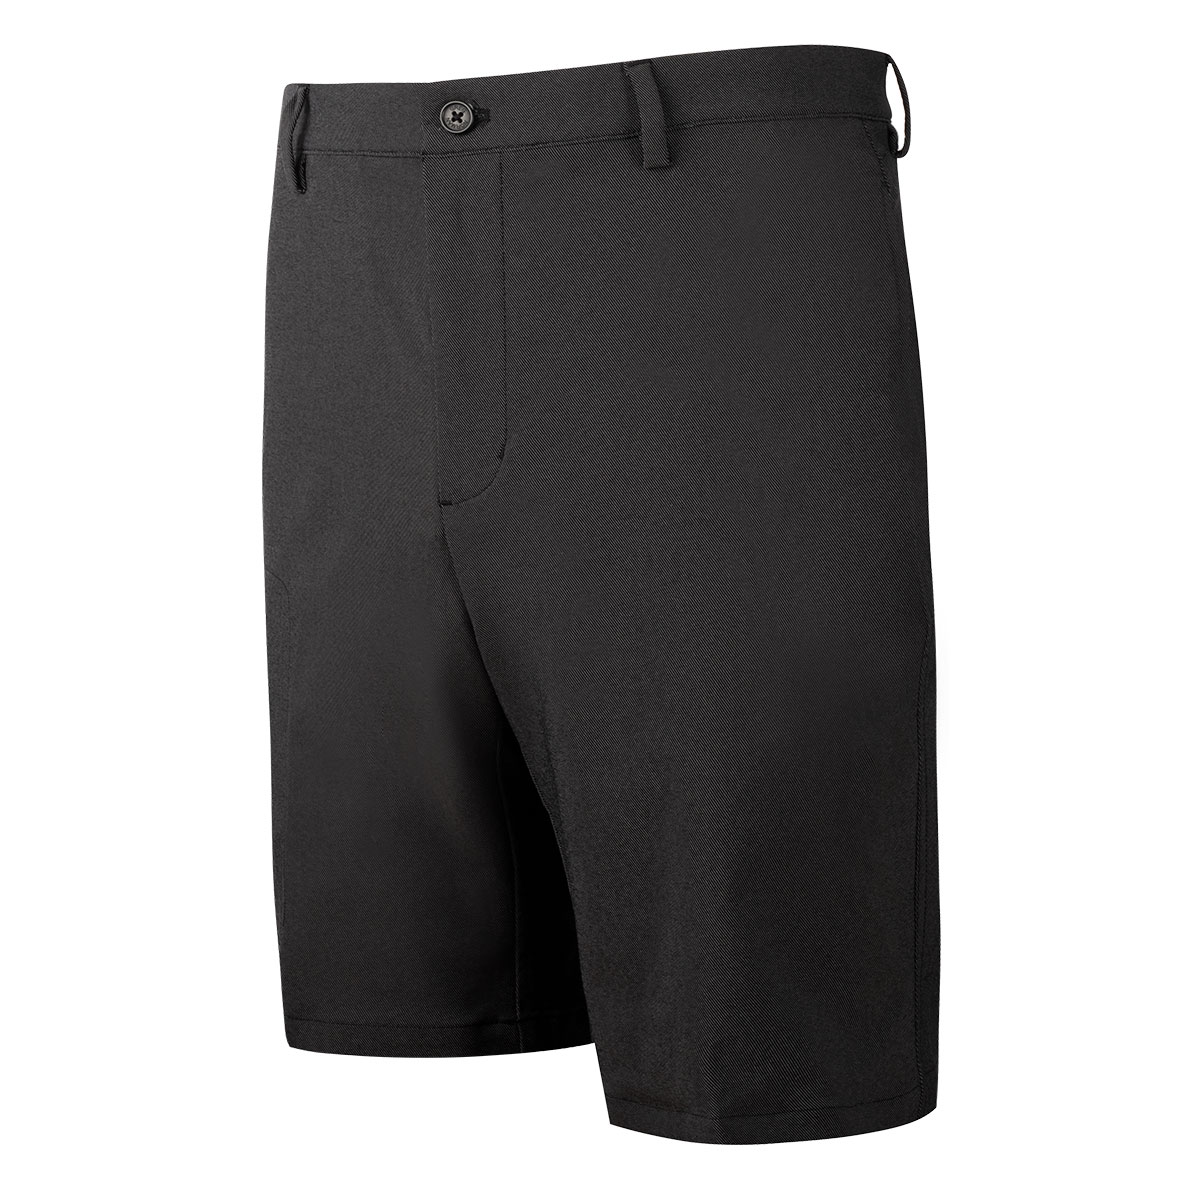 Greg Norman Performance Shorts from american golf